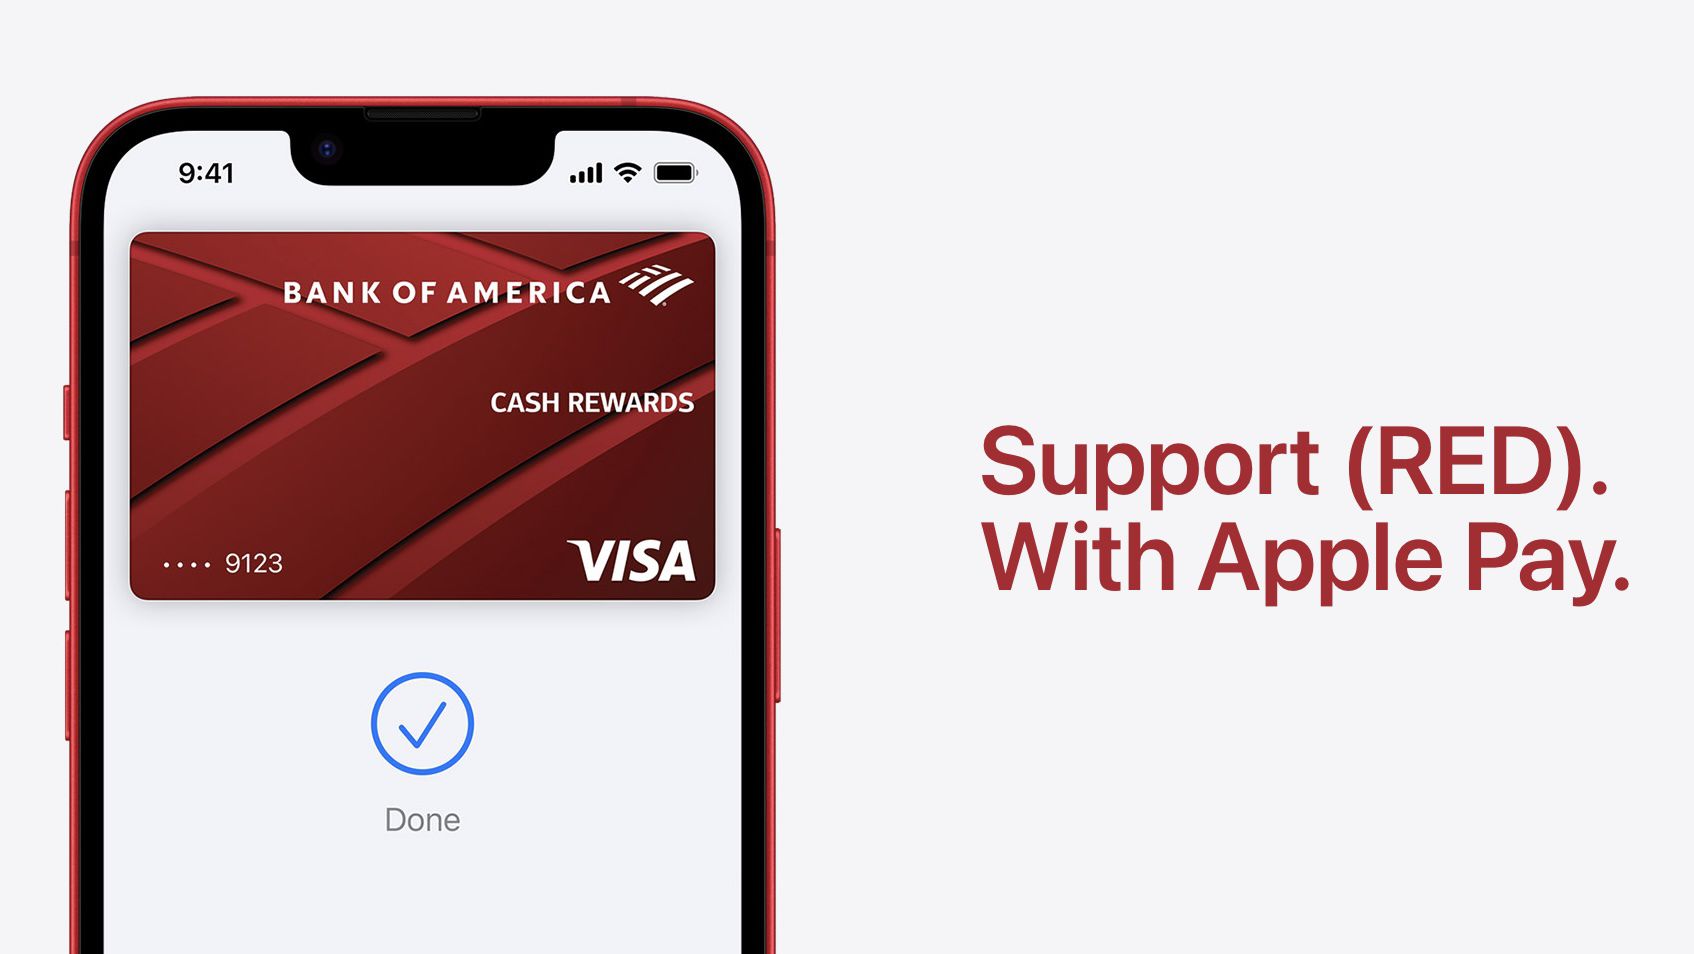 Apple Store Purchases Made With Apple Pay Support (RED) Through Next Week